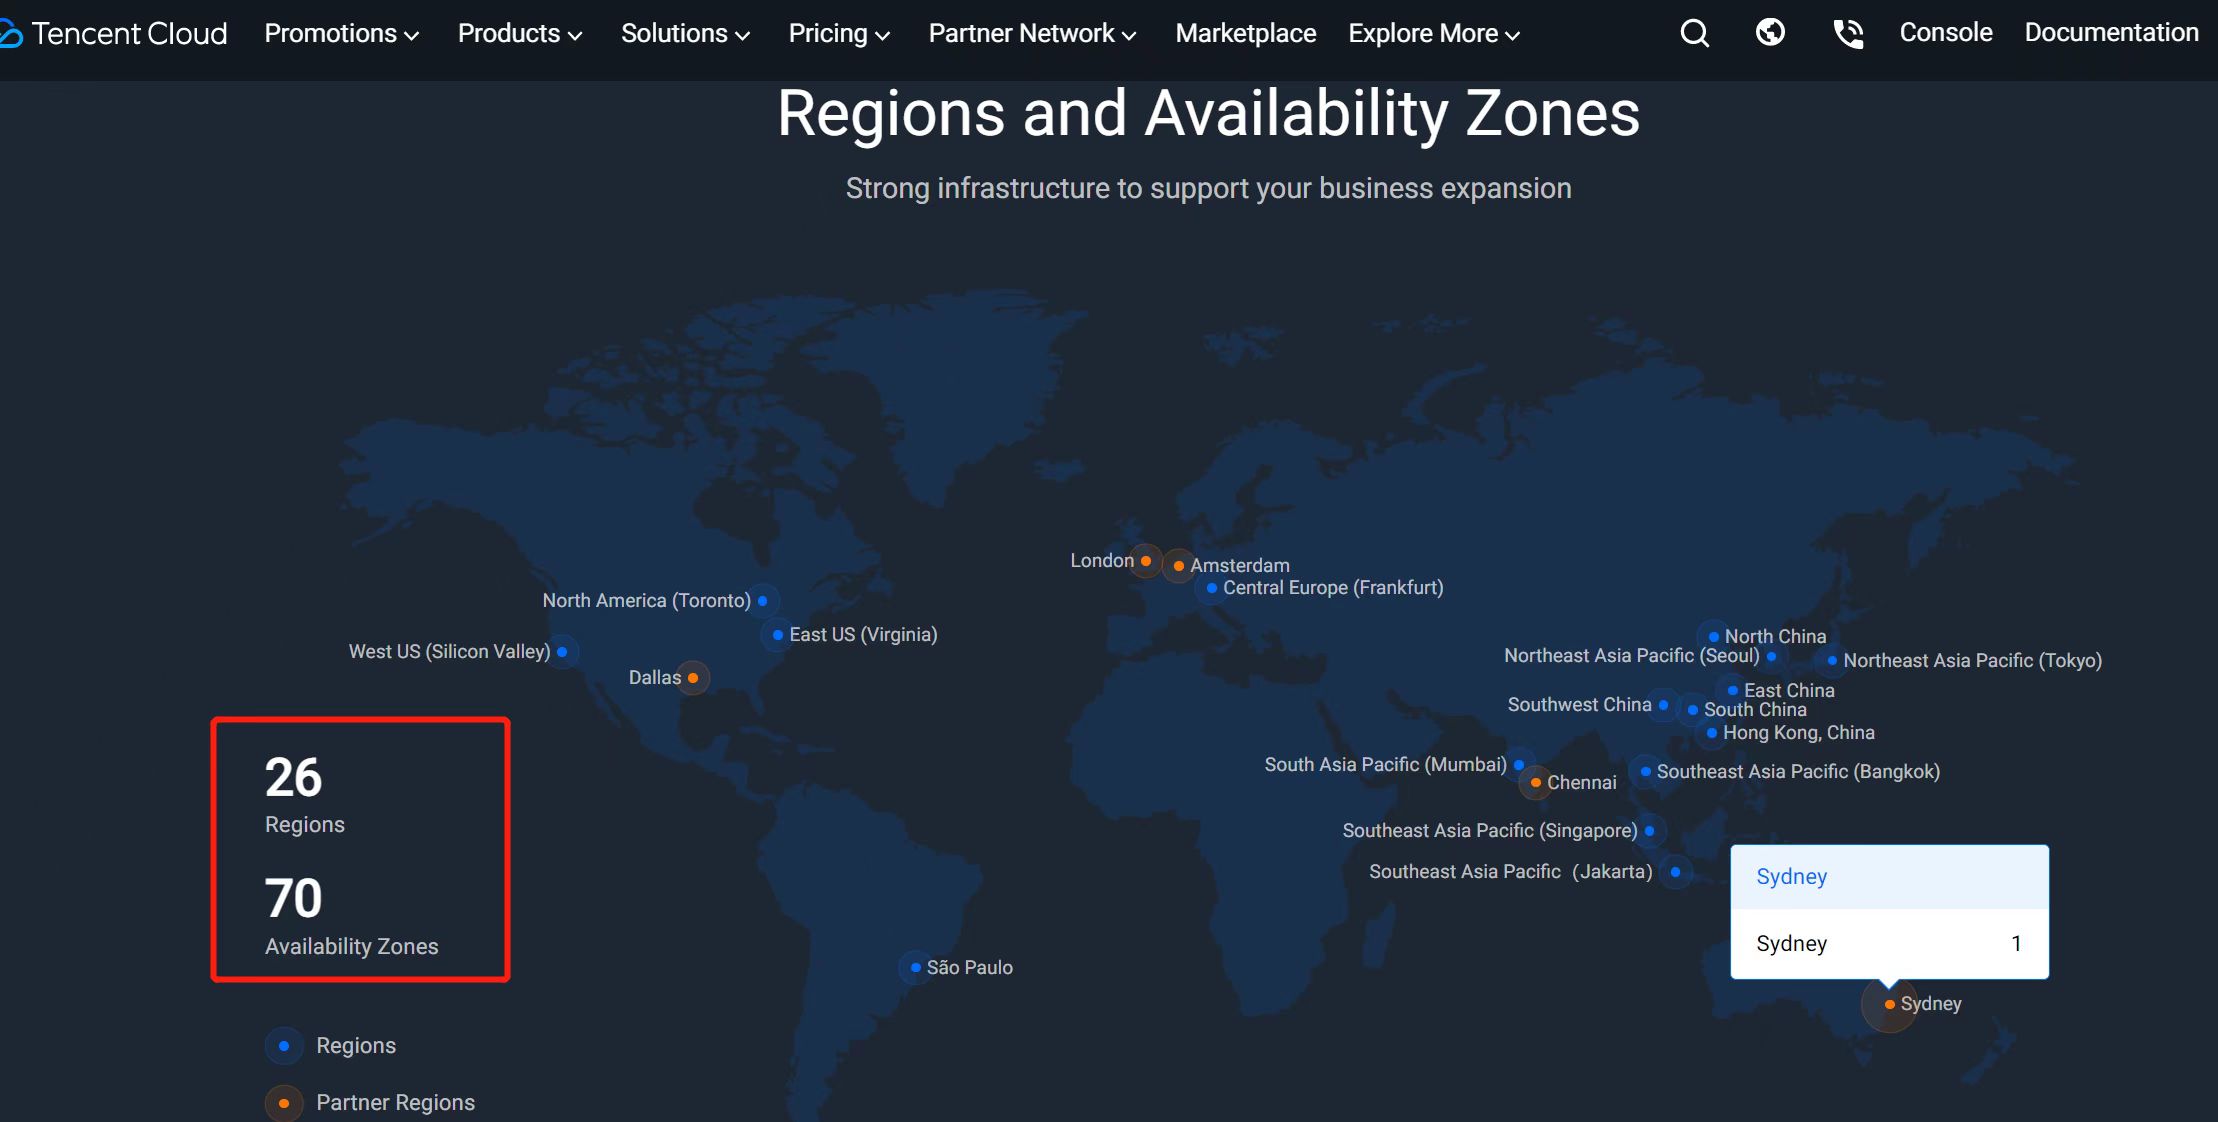 Regions and Availability Zones of Tencent servers